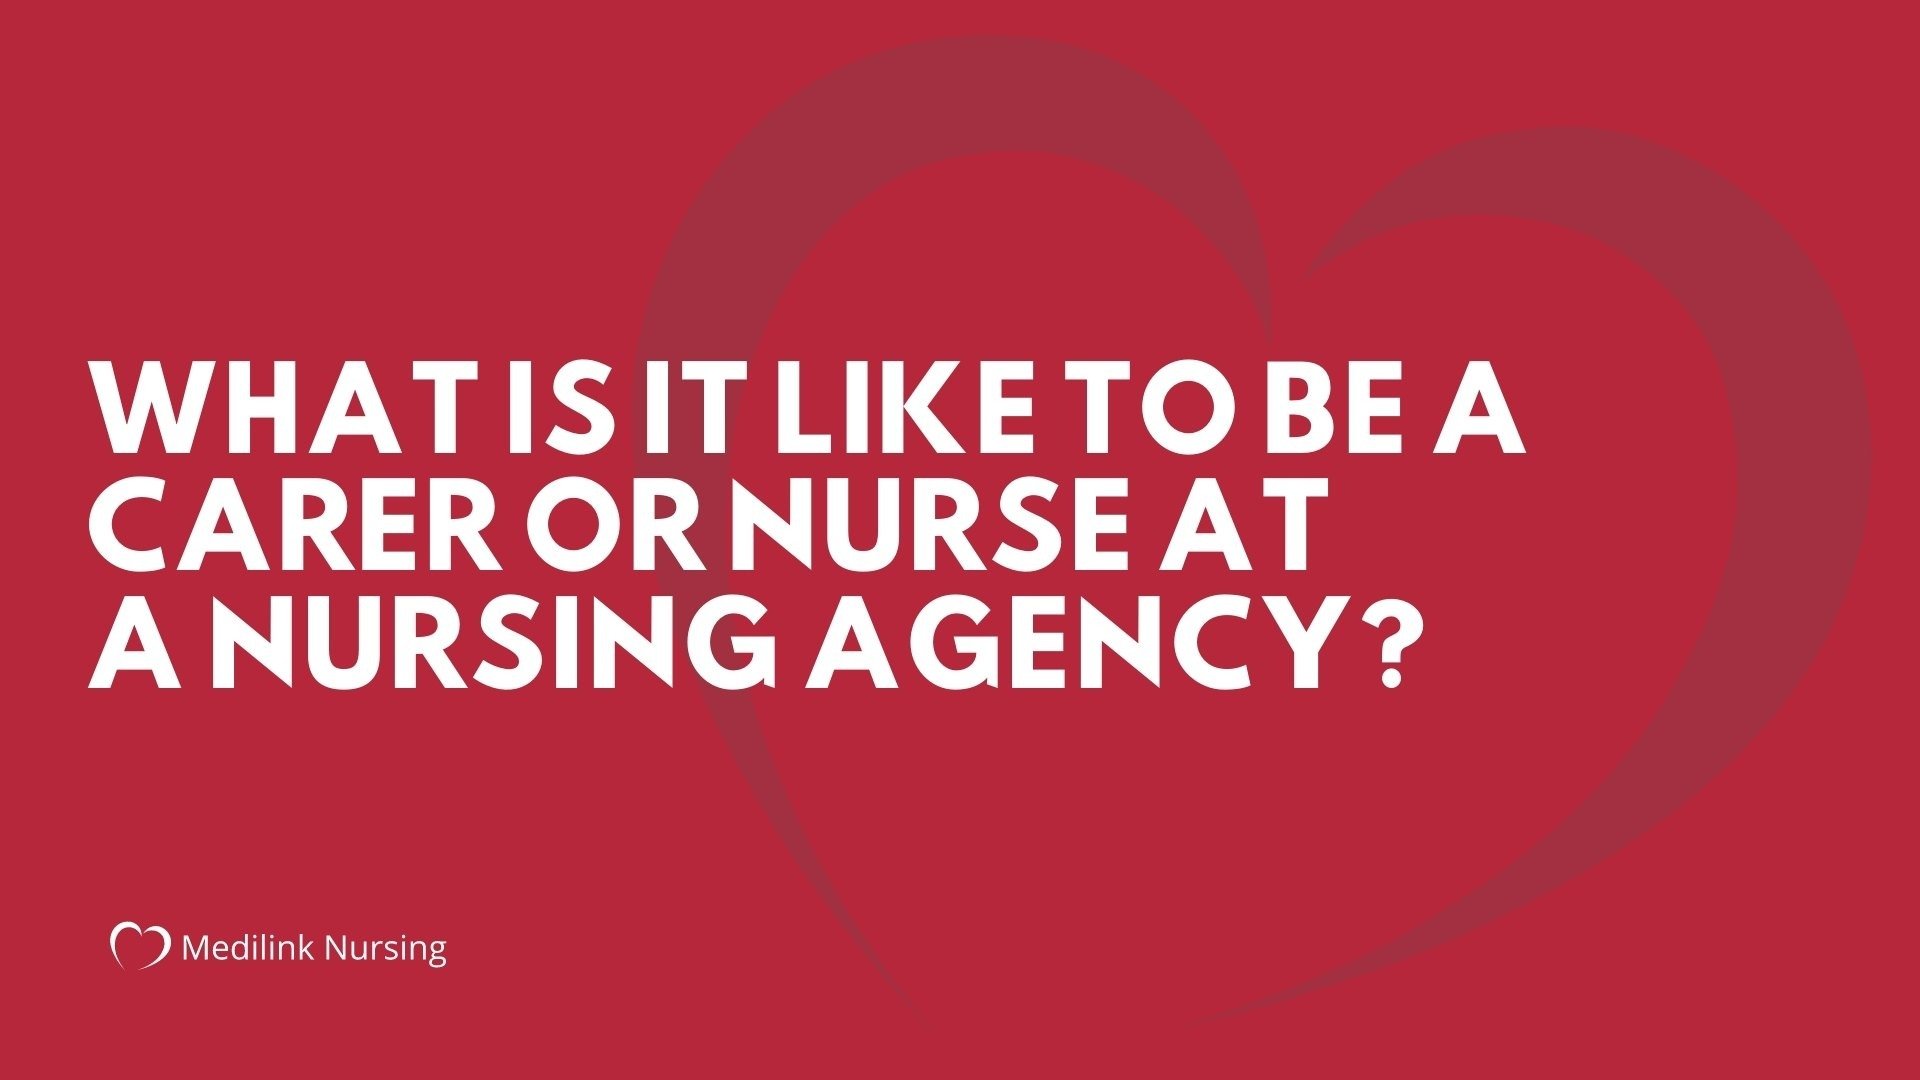 What Is It Like To Be A Carer or Nurse at a Nursing Agency?